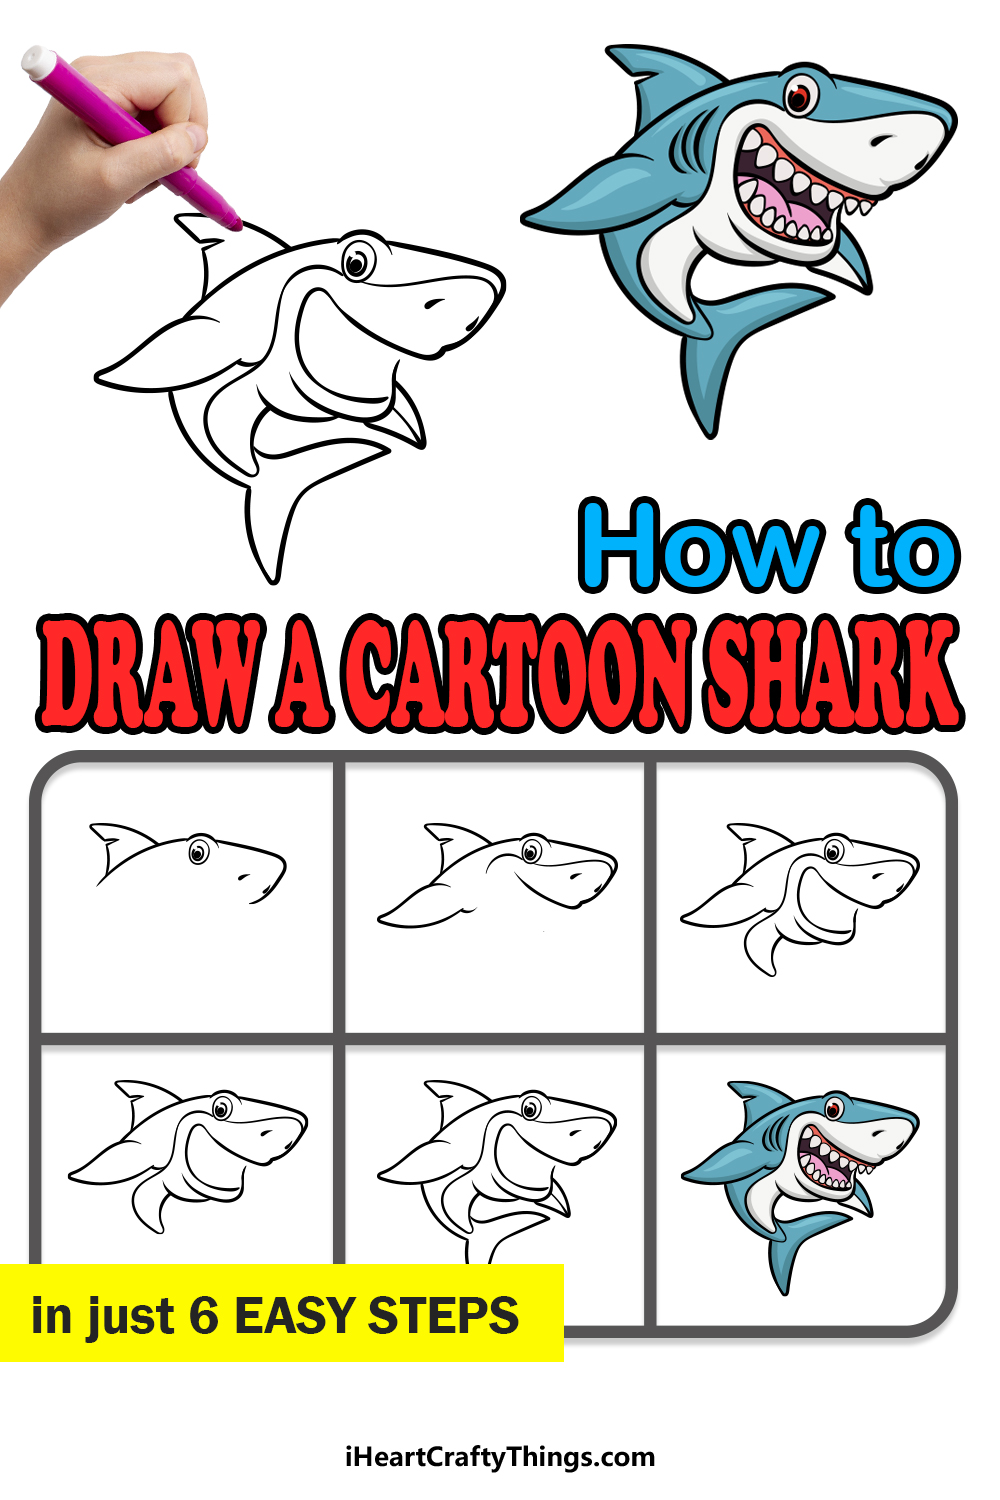 how to draw a cartoon shark in 6 easy steps